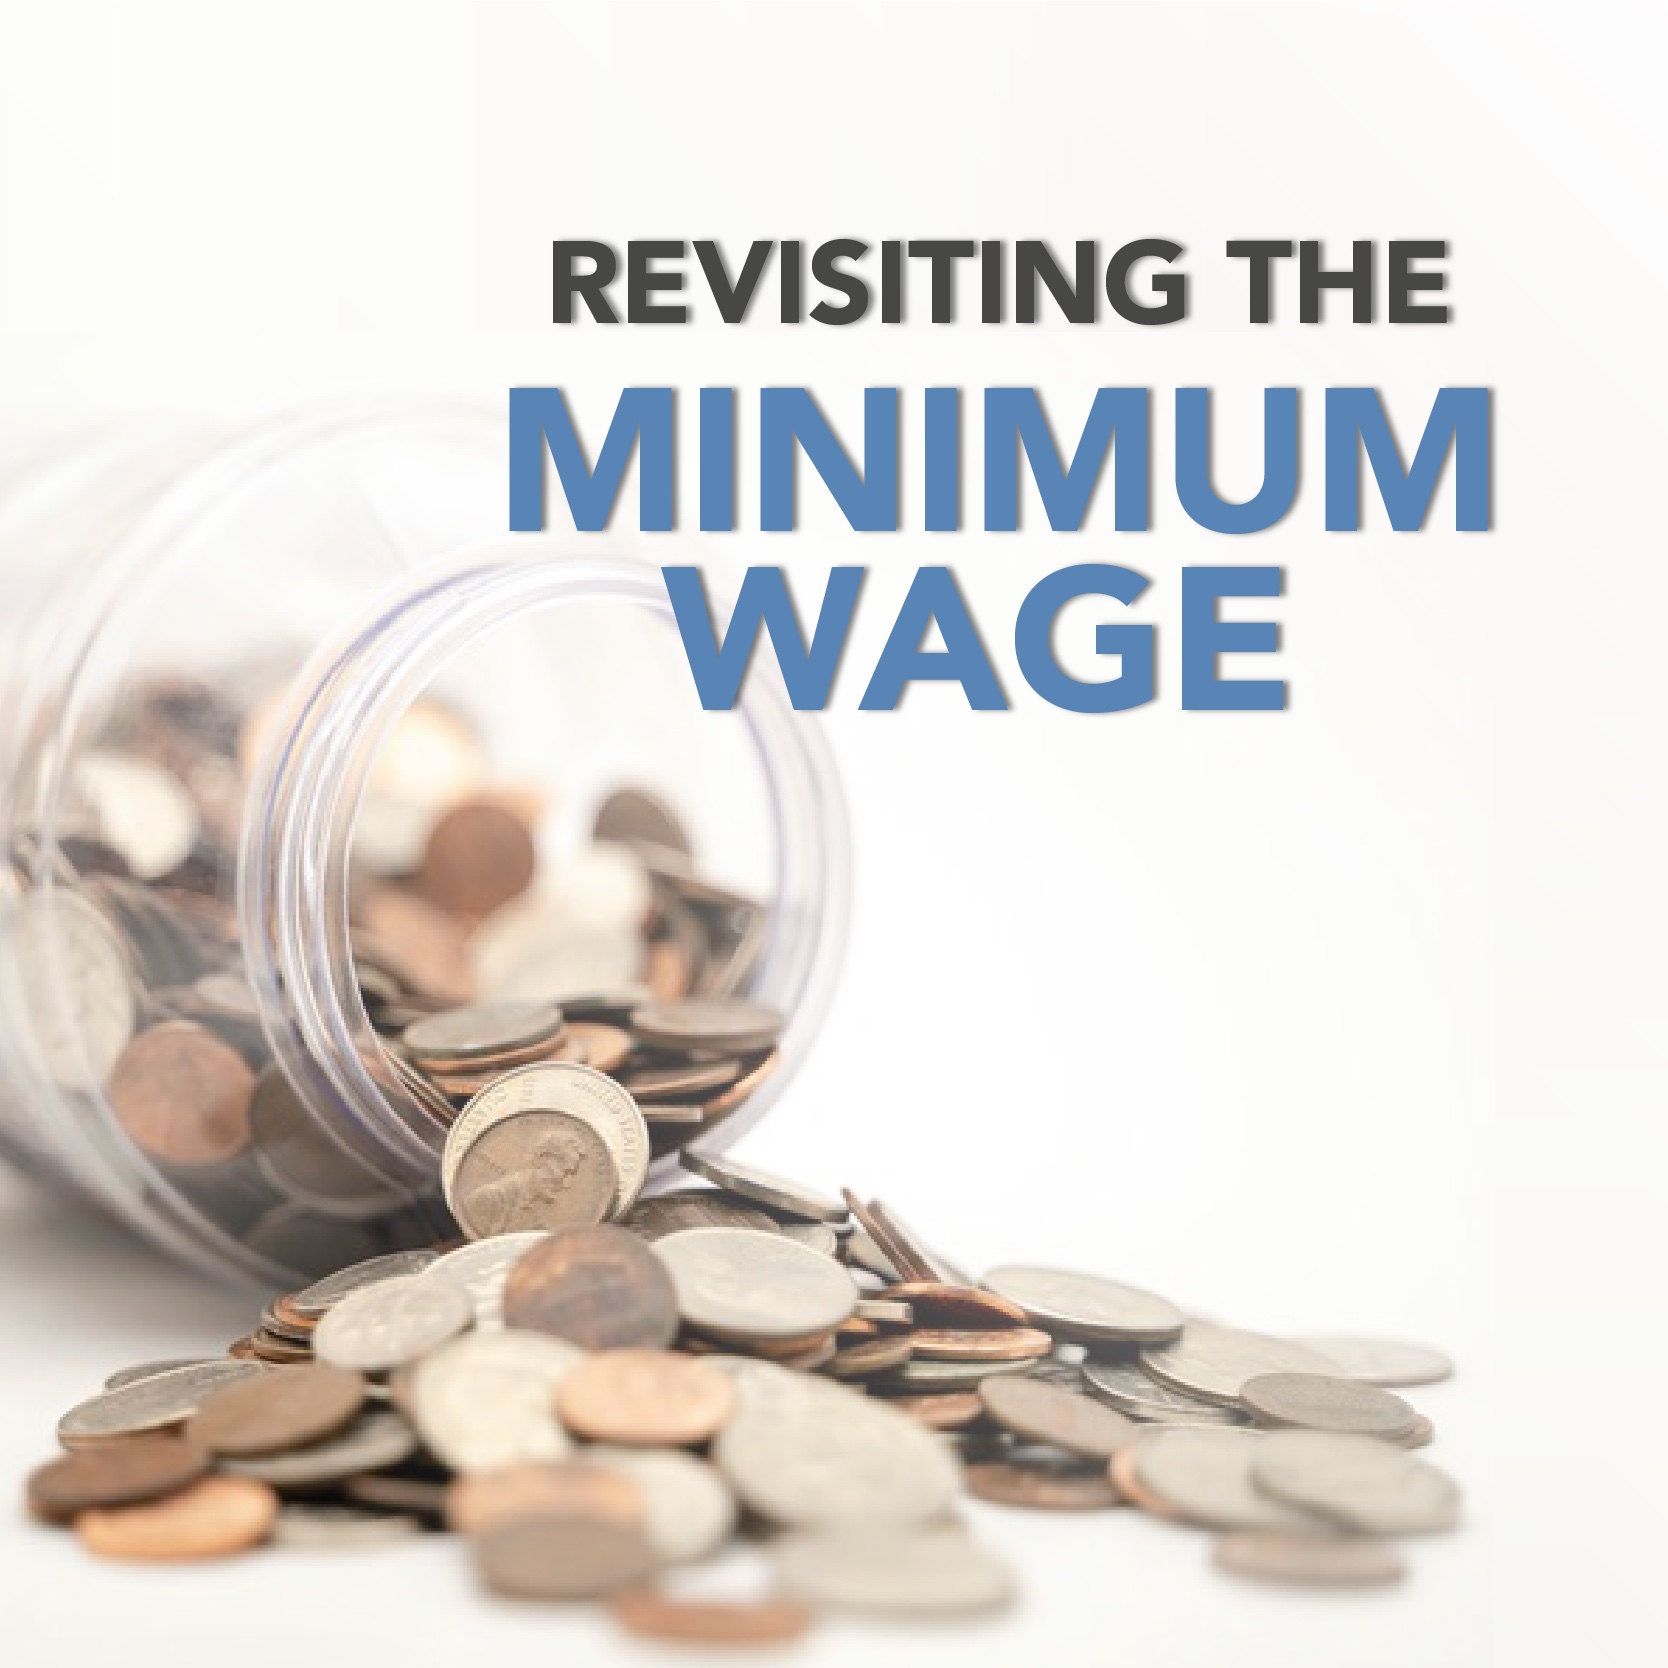 Revisiting the Minimum Wage